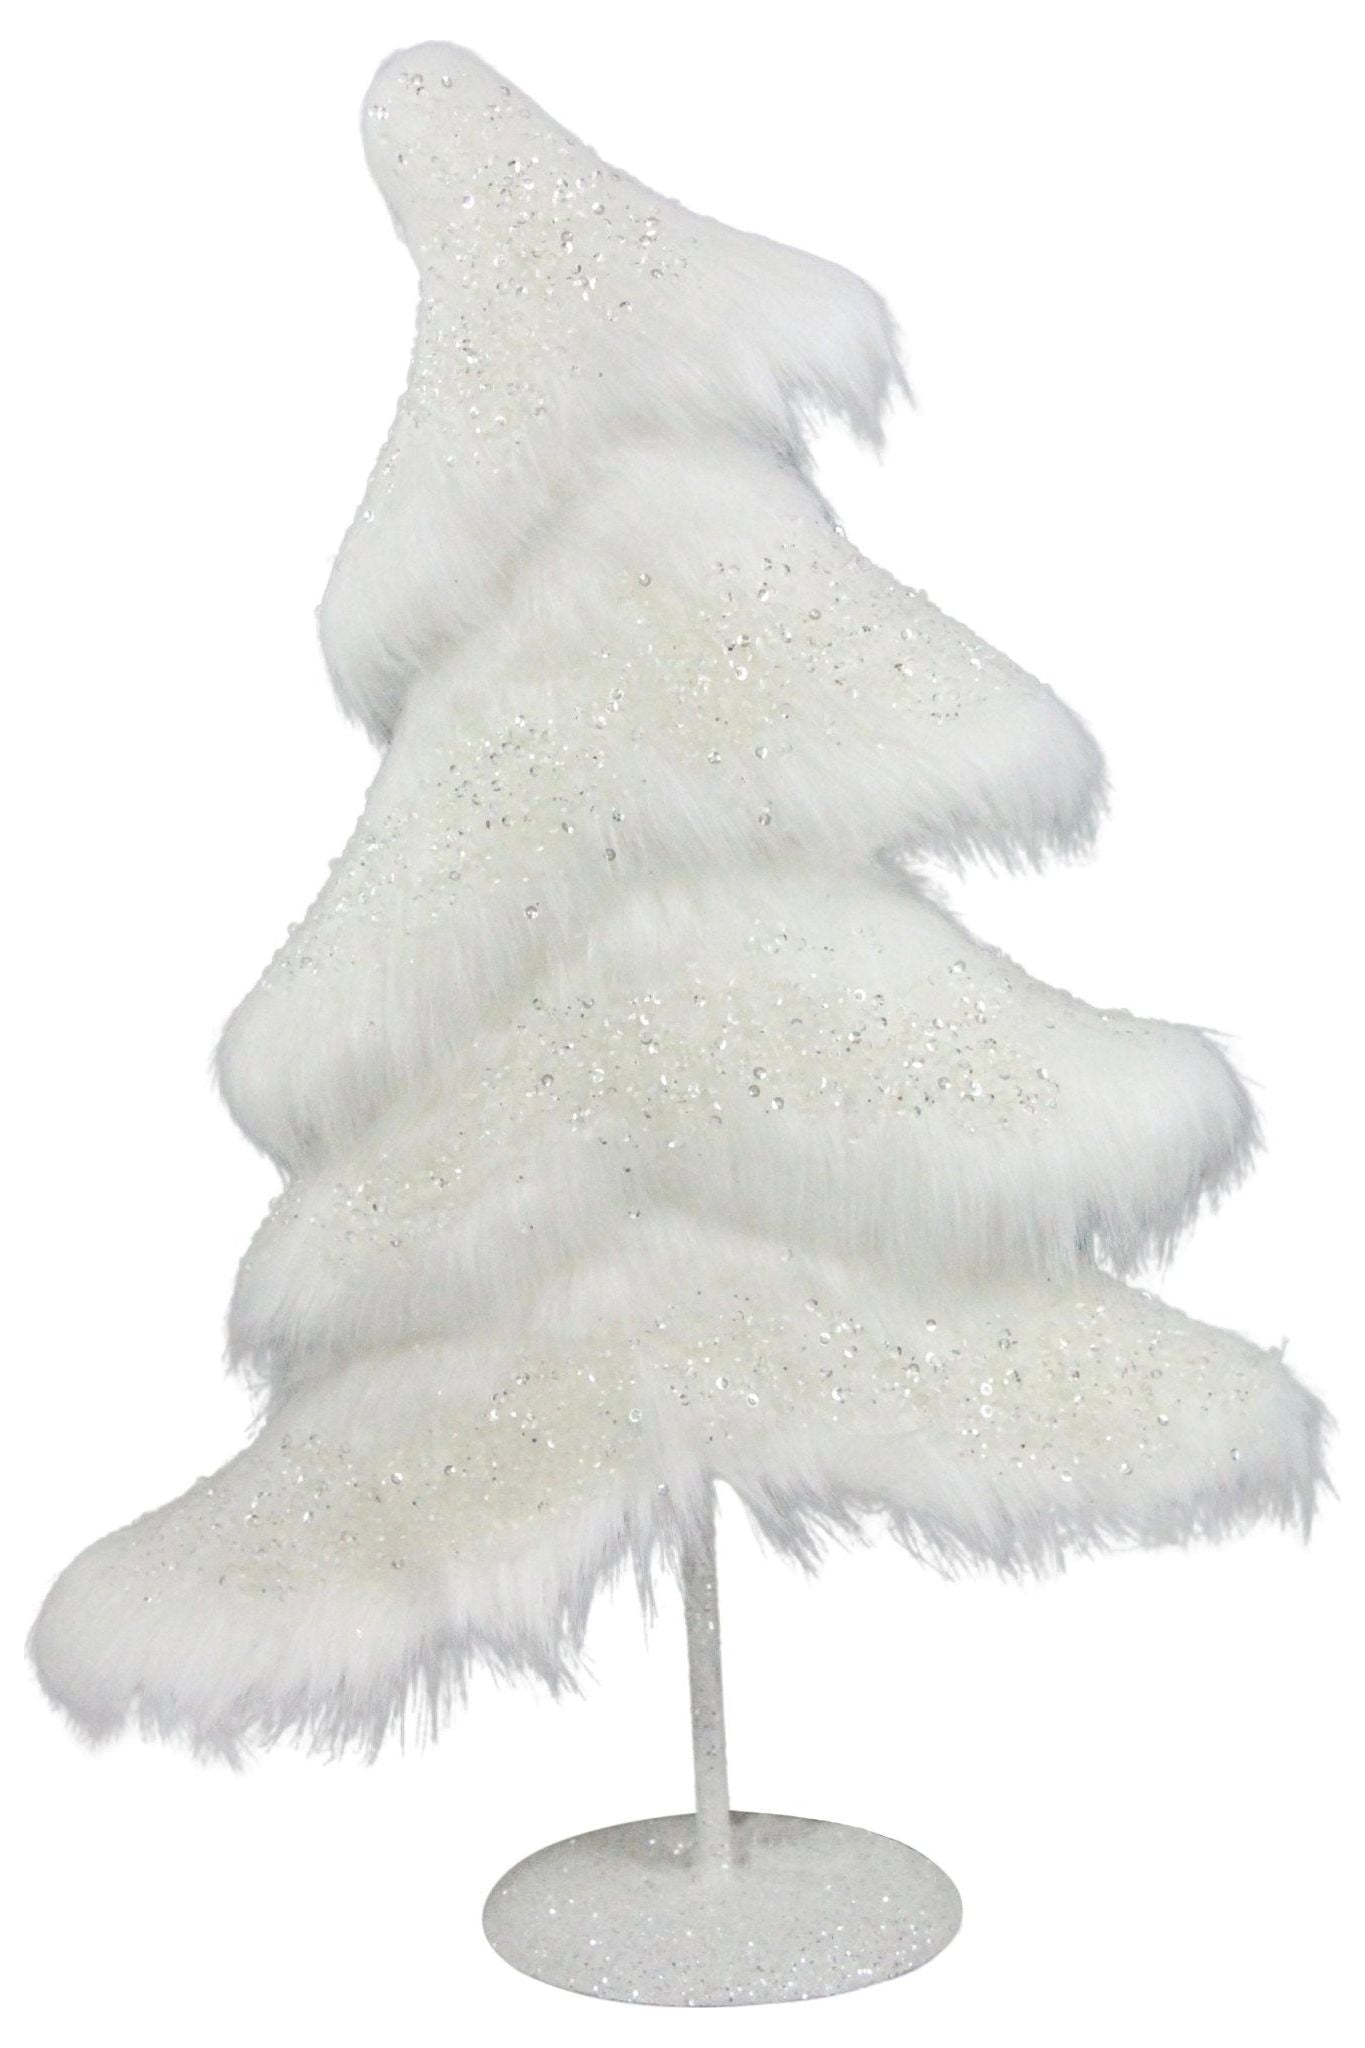 Shop For 18.5" Fabric Sequin Christmas Tree: White XT003427